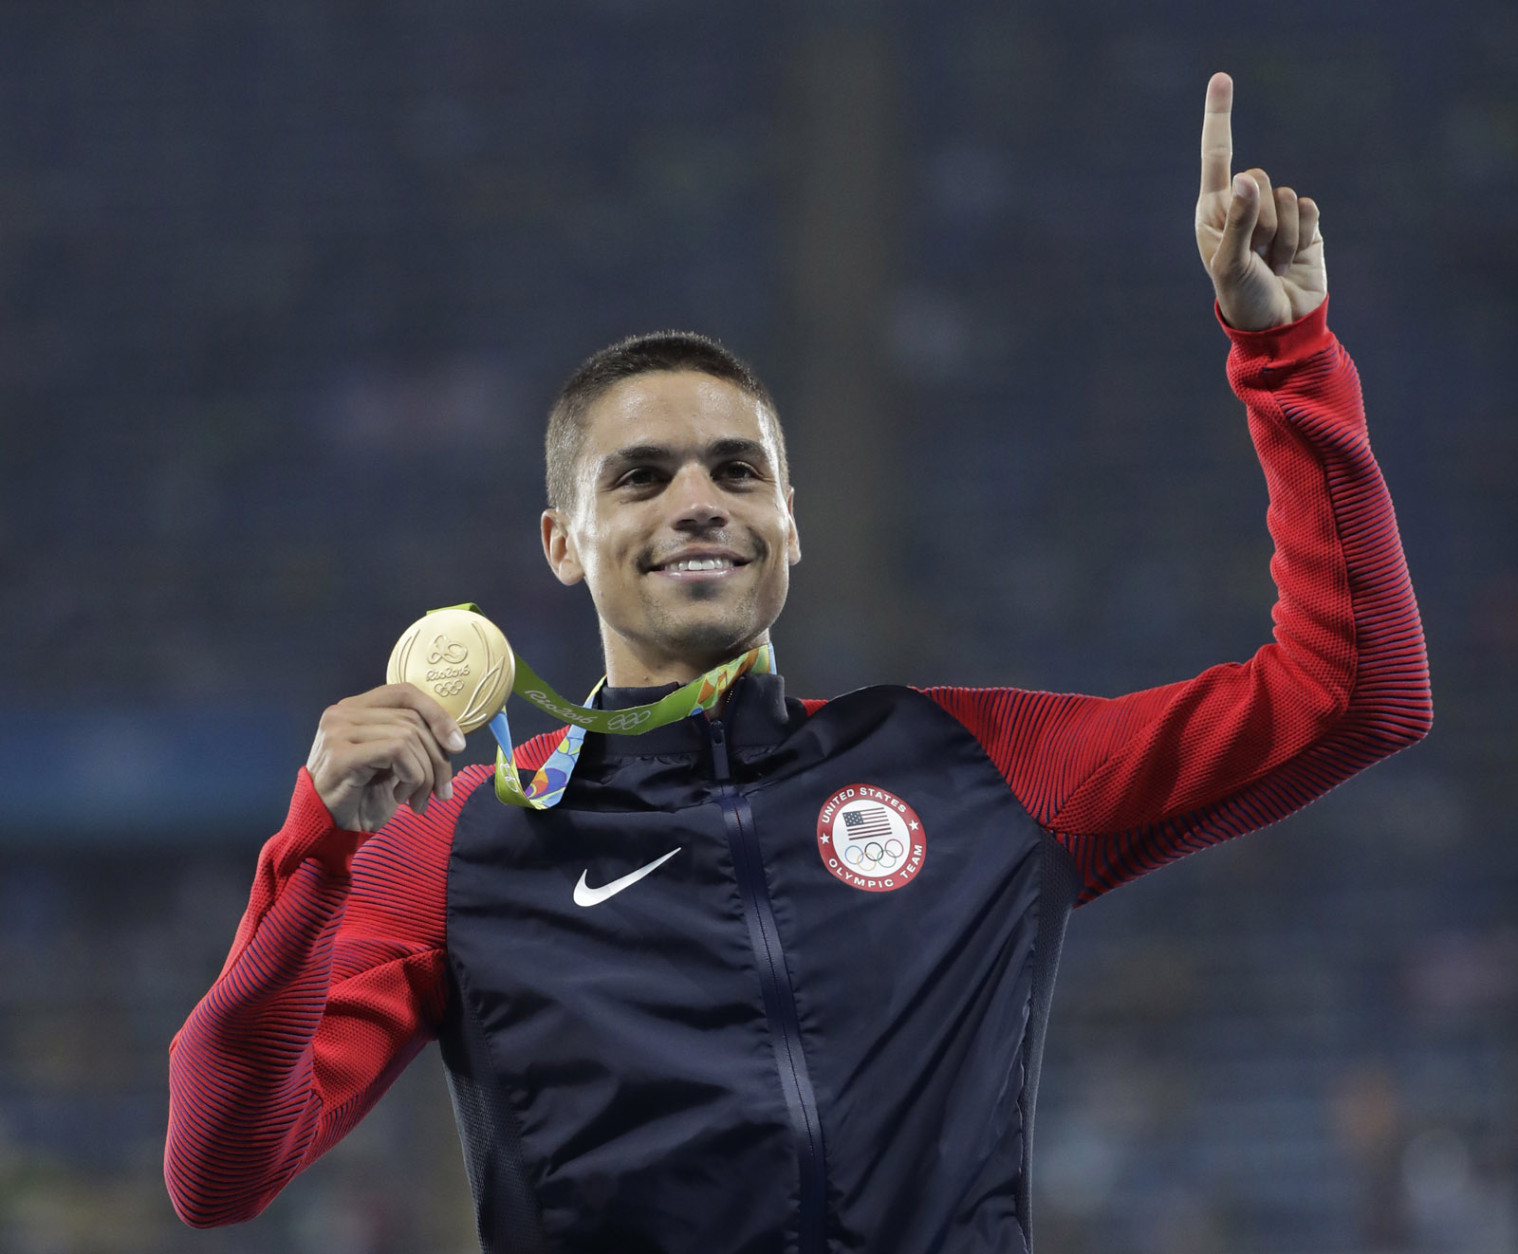 United States' Matthew Centrowitz celebrates on the podium after winning the men's 1500-meter final during athletics competitions at the Summer Olympics inside Olympic stadium in Rio de Janeiro, Brazil, Saturday, Aug. 20, 2016. (AP Photo/Jae C. Hong)